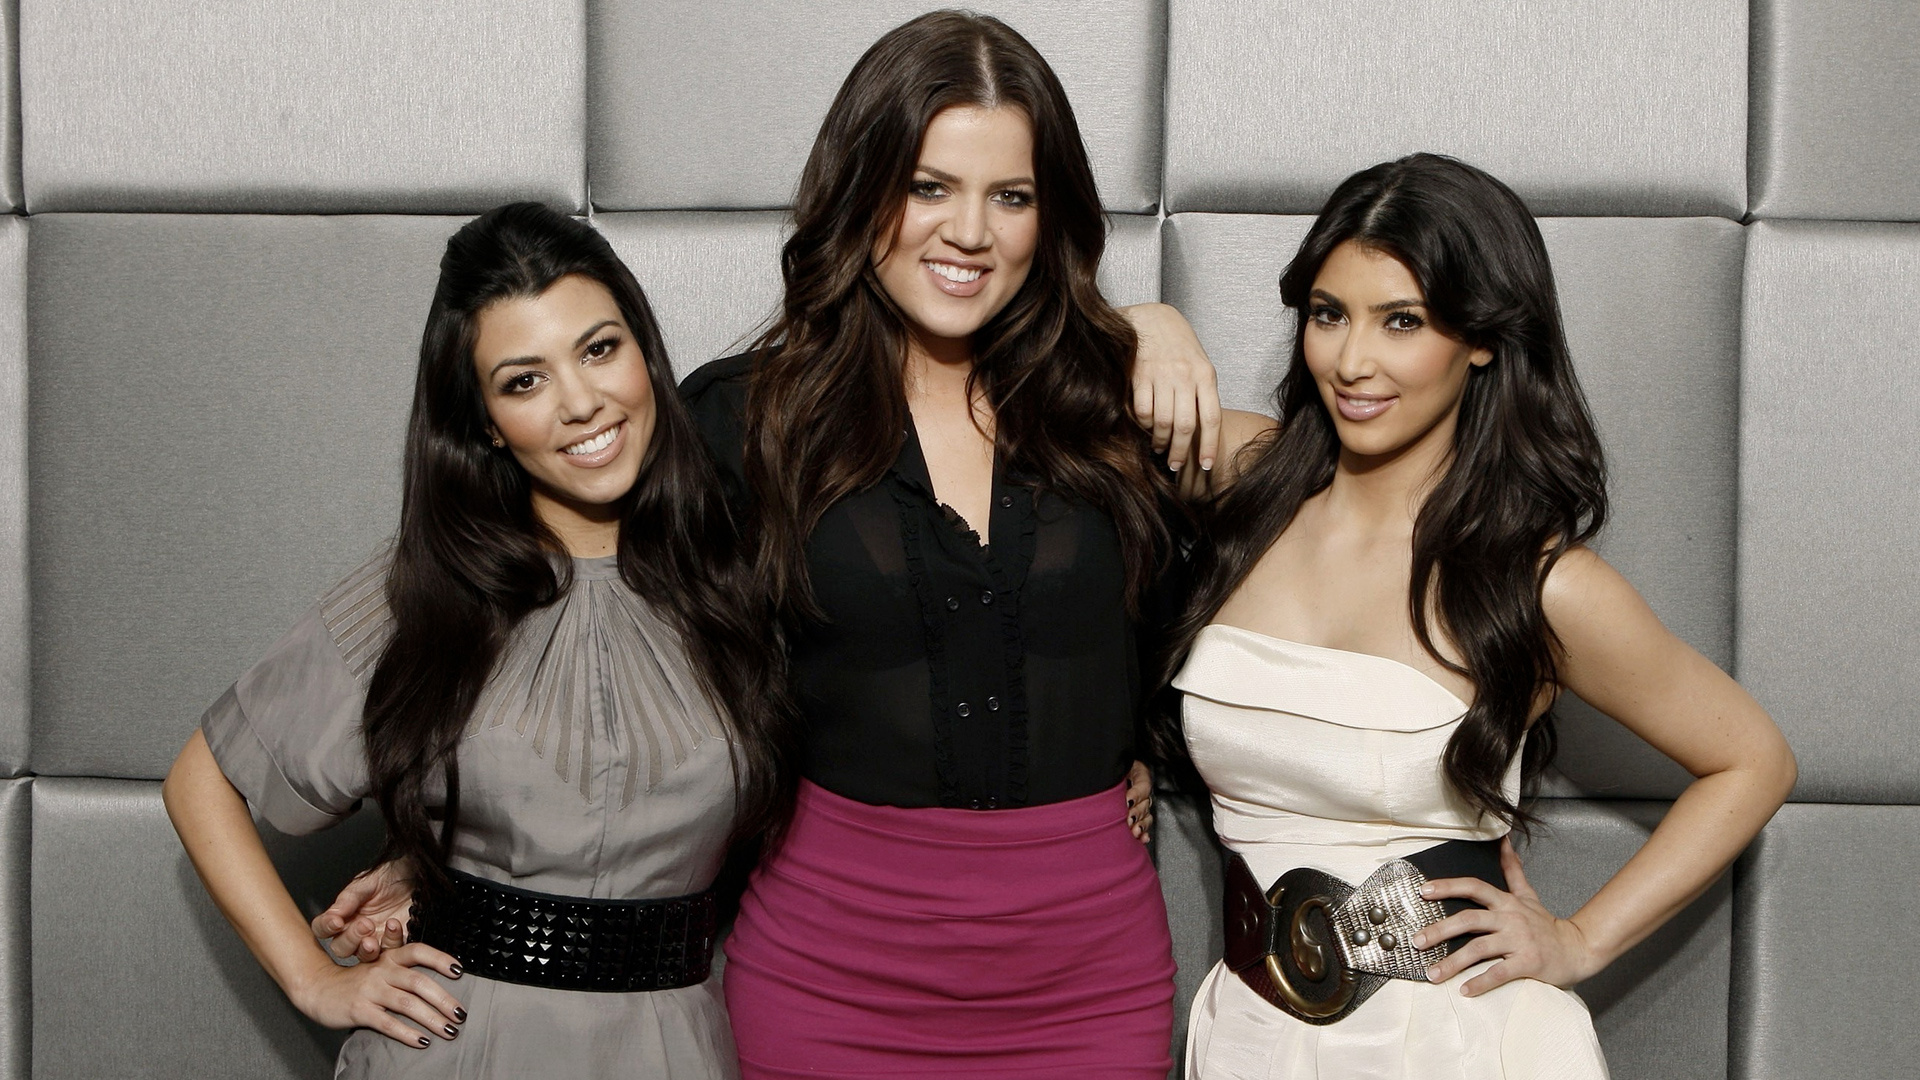 Keeping Up With the Kardashians, TV Shows, HD Wallpaper, Background Image, 1920x1080 Full HD Desktop